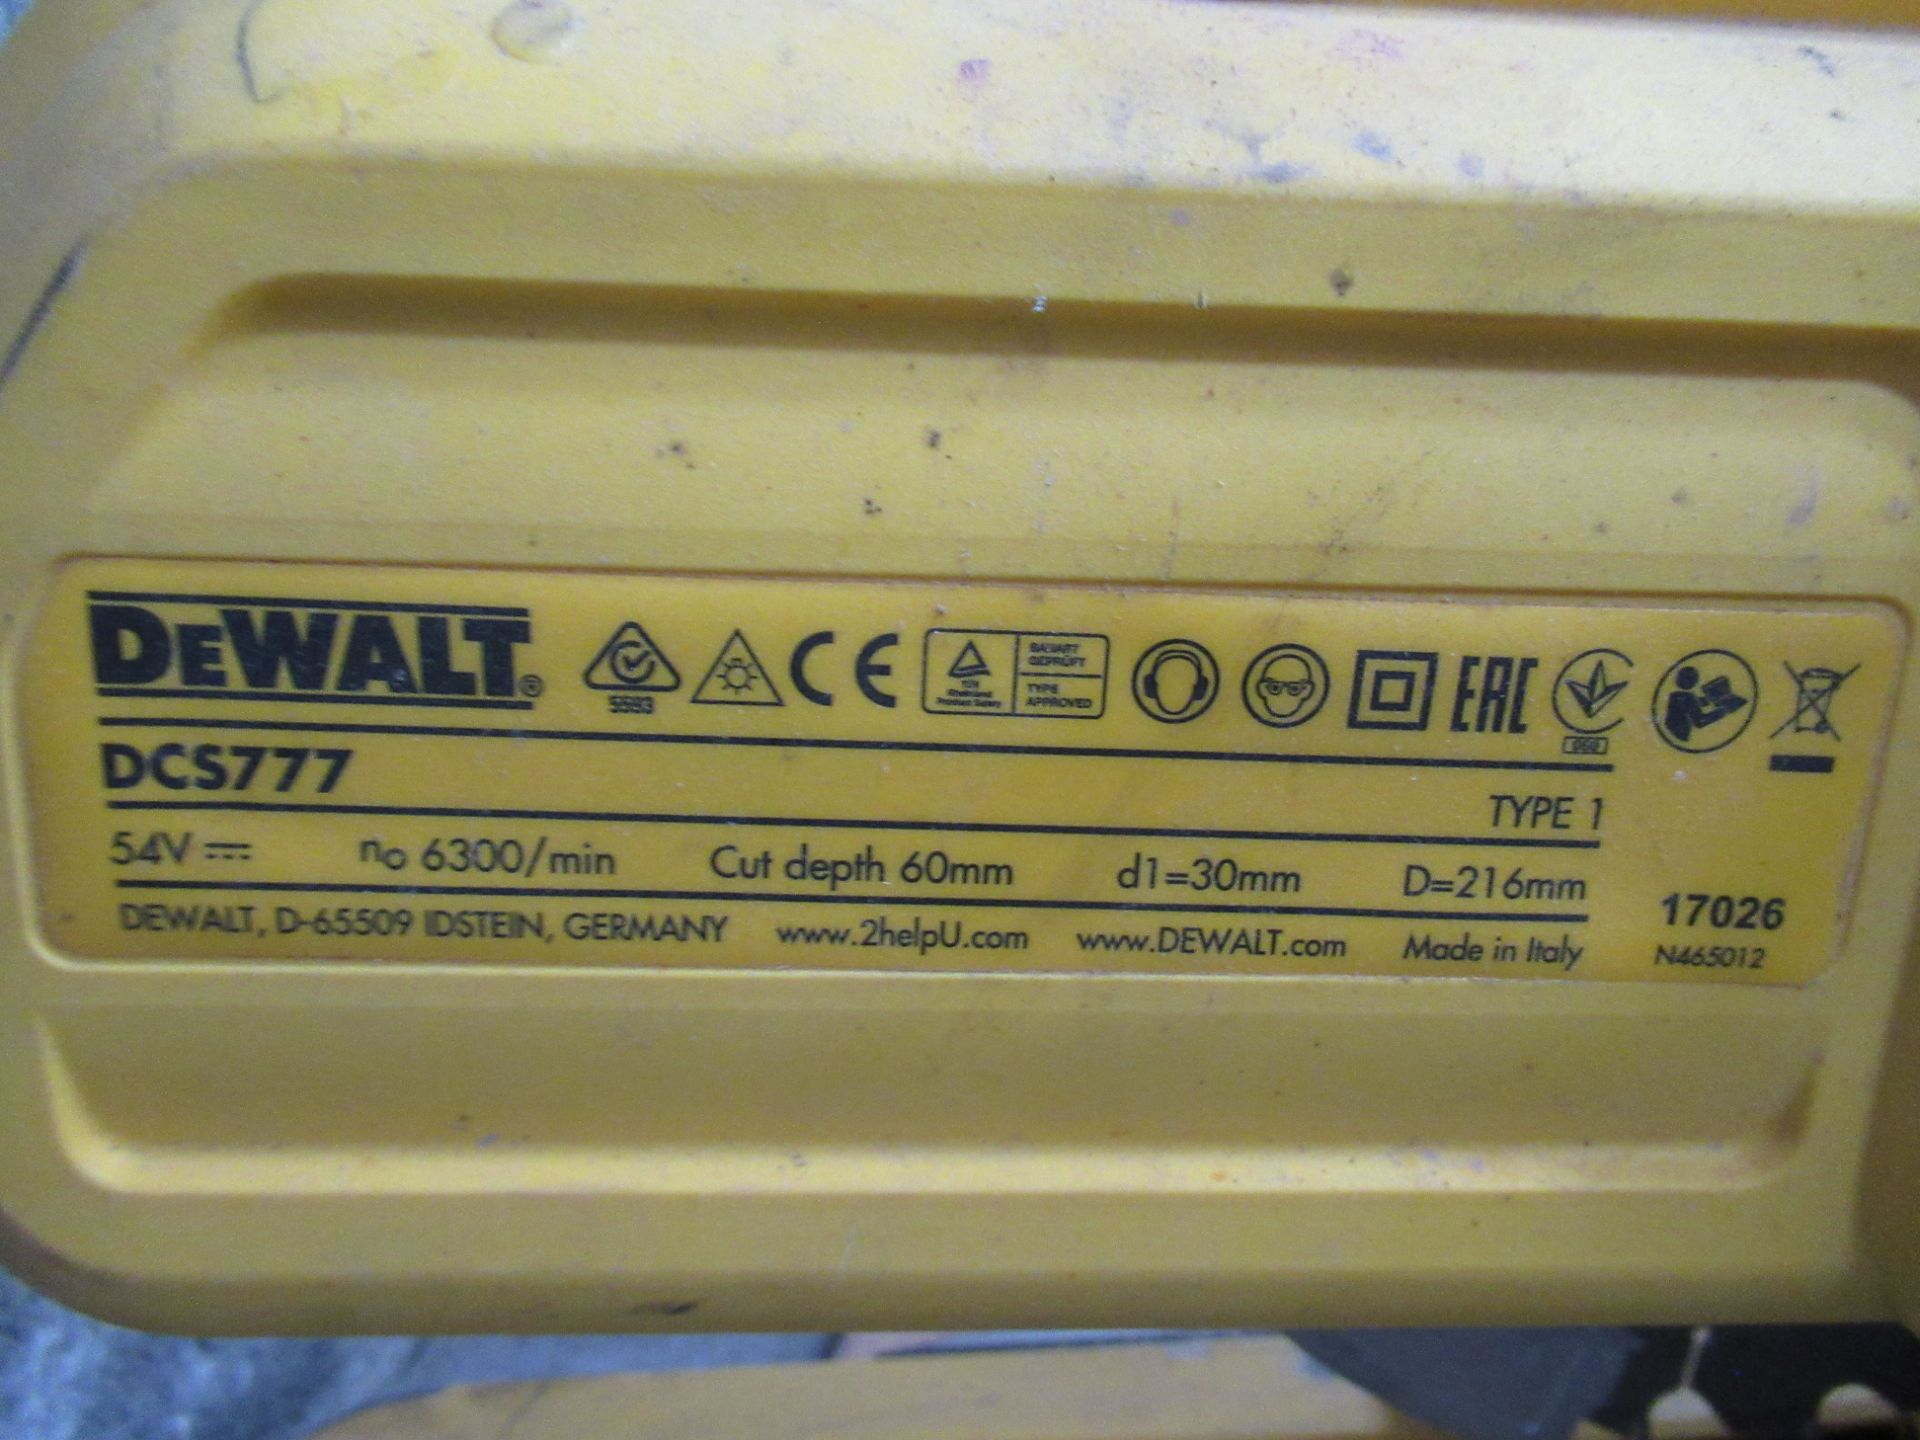 DeWalt DCS777 Battery Powered Mitre Saw - missing battery - Image 3 of 5